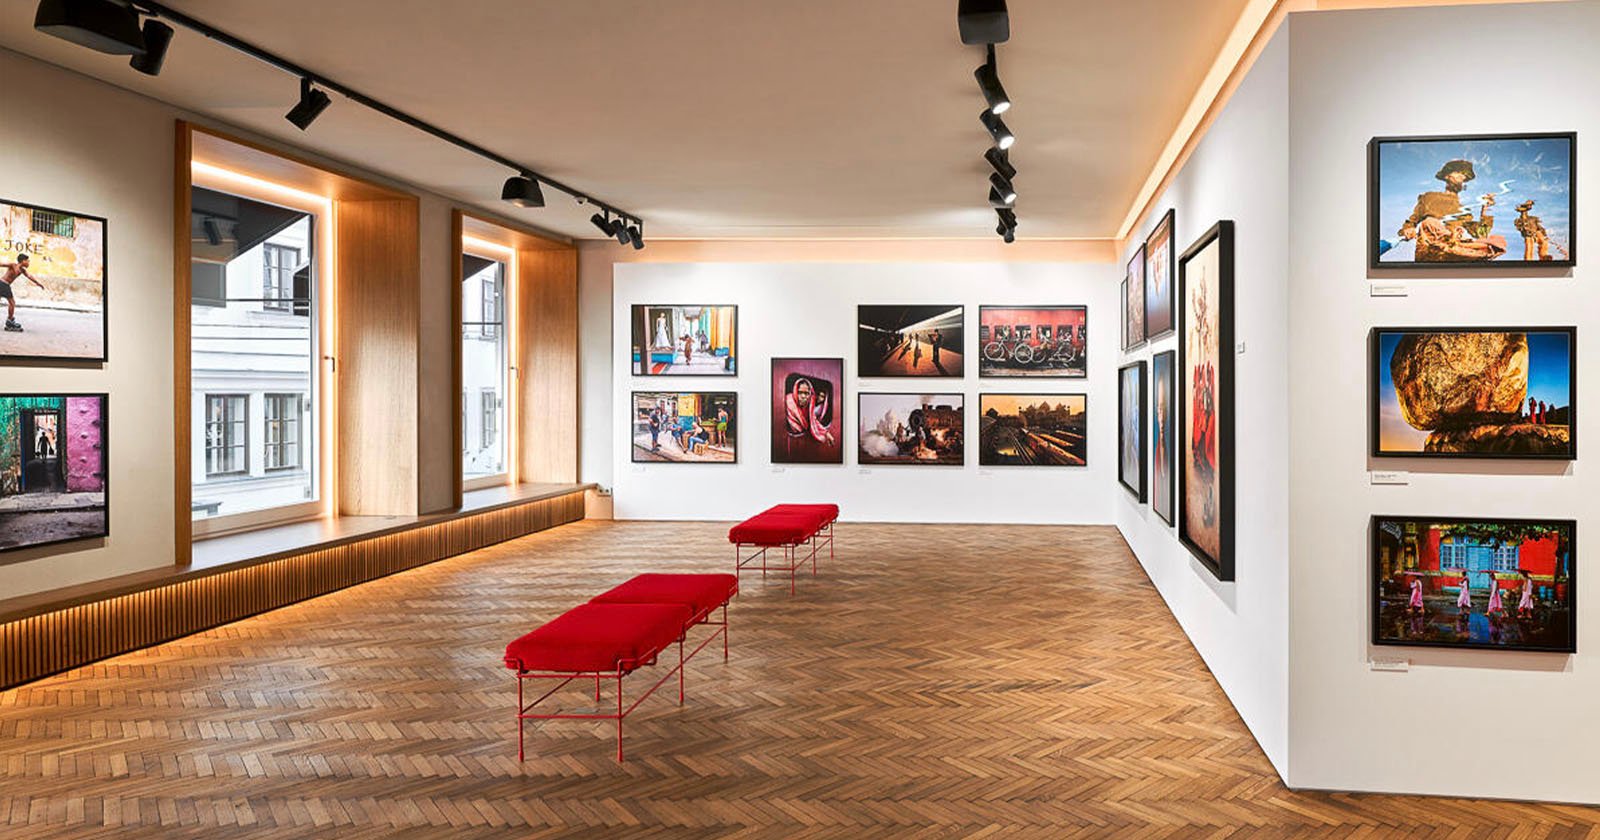 Leica Operates the Largest Chain of Photo Galleries in the World